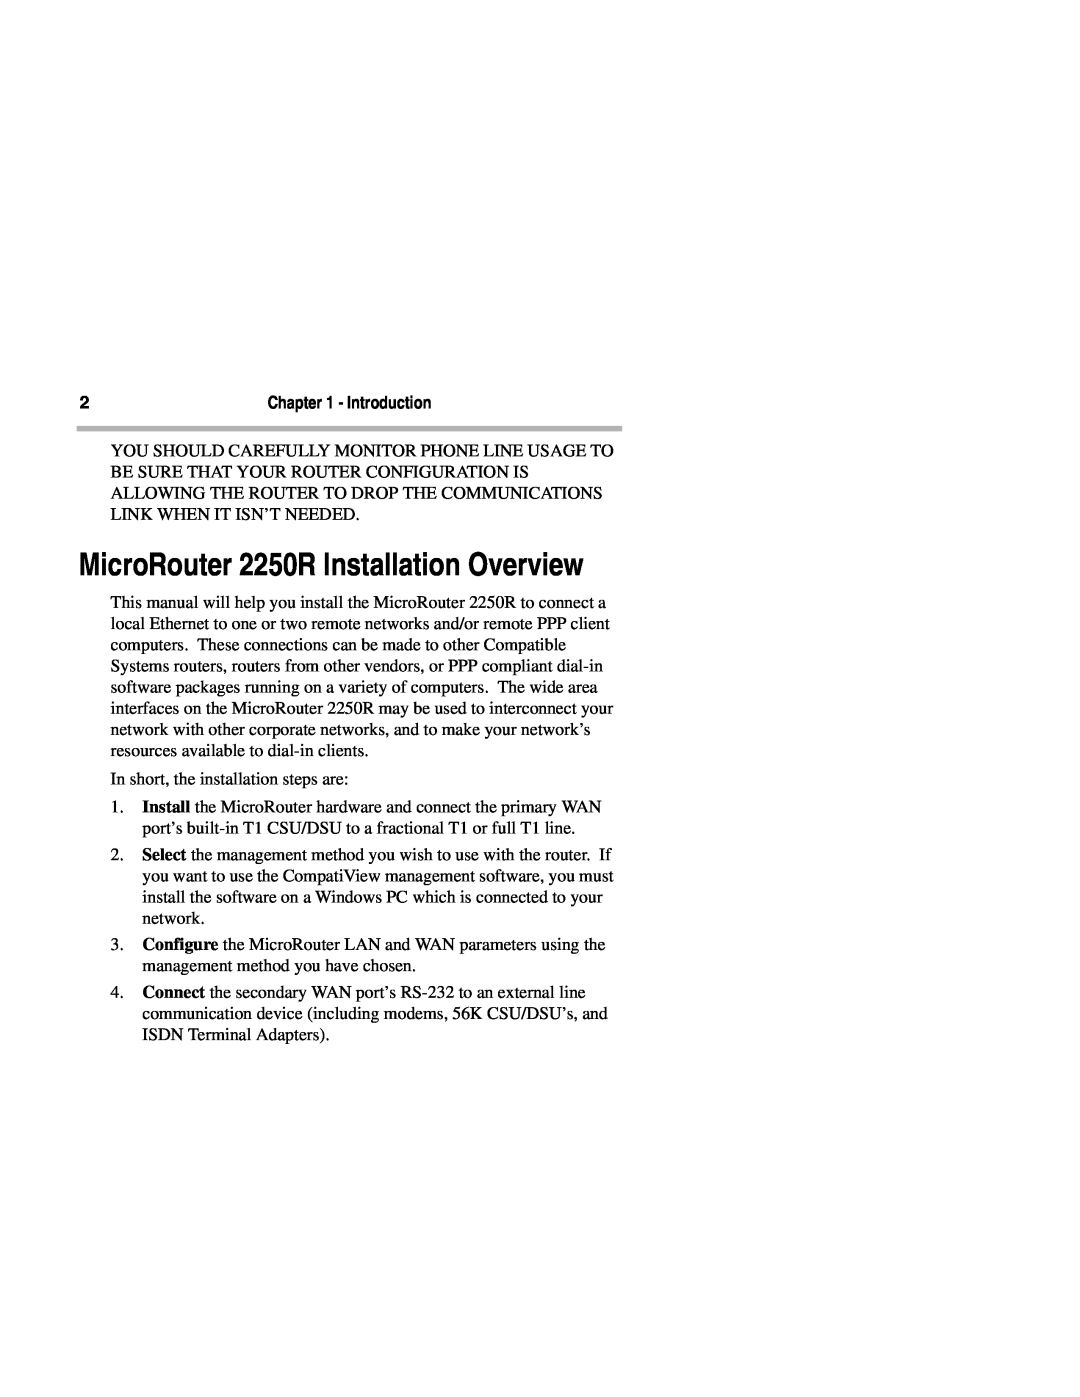 Compatible Systems manual MicroRouter 2250R Installation Overview, Introduction 